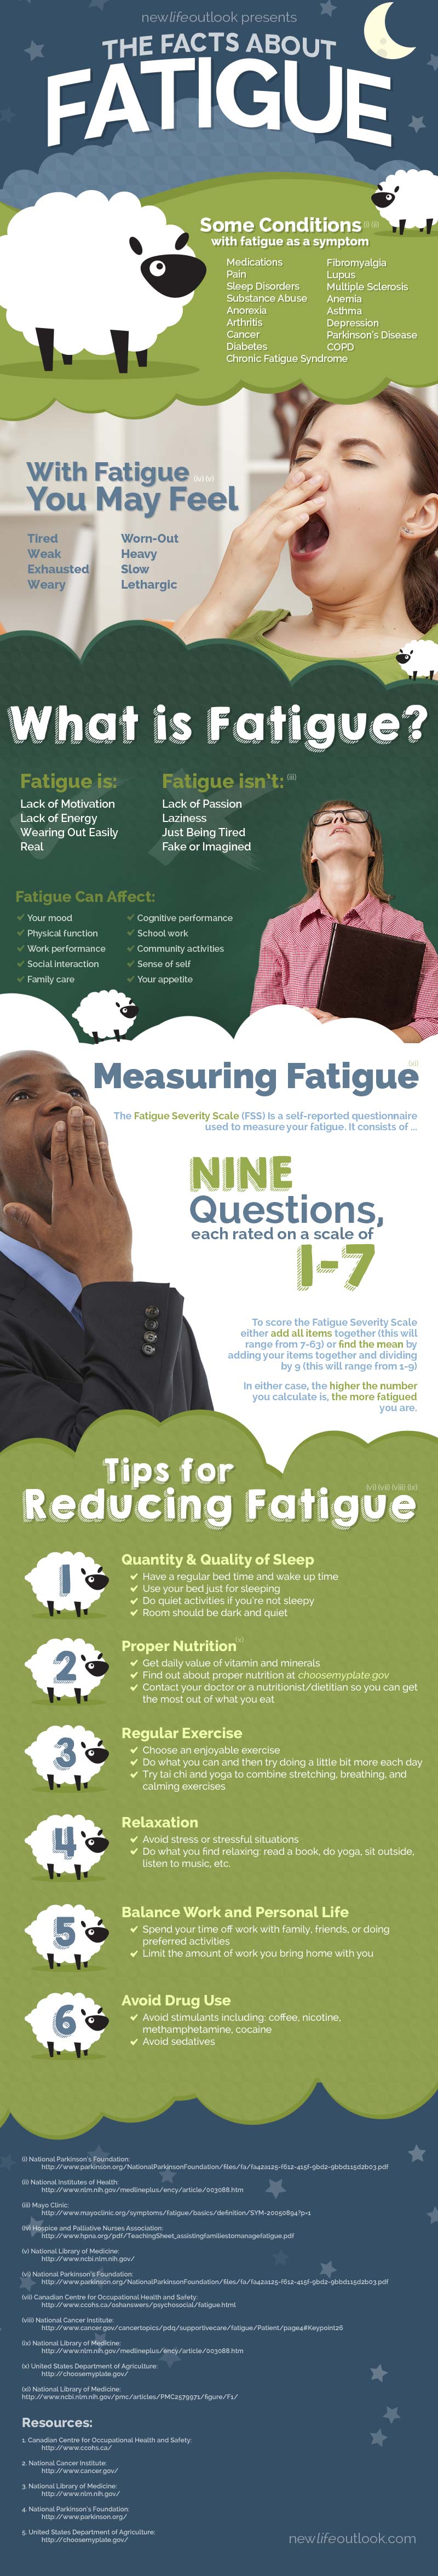 The Facts About Fatigue